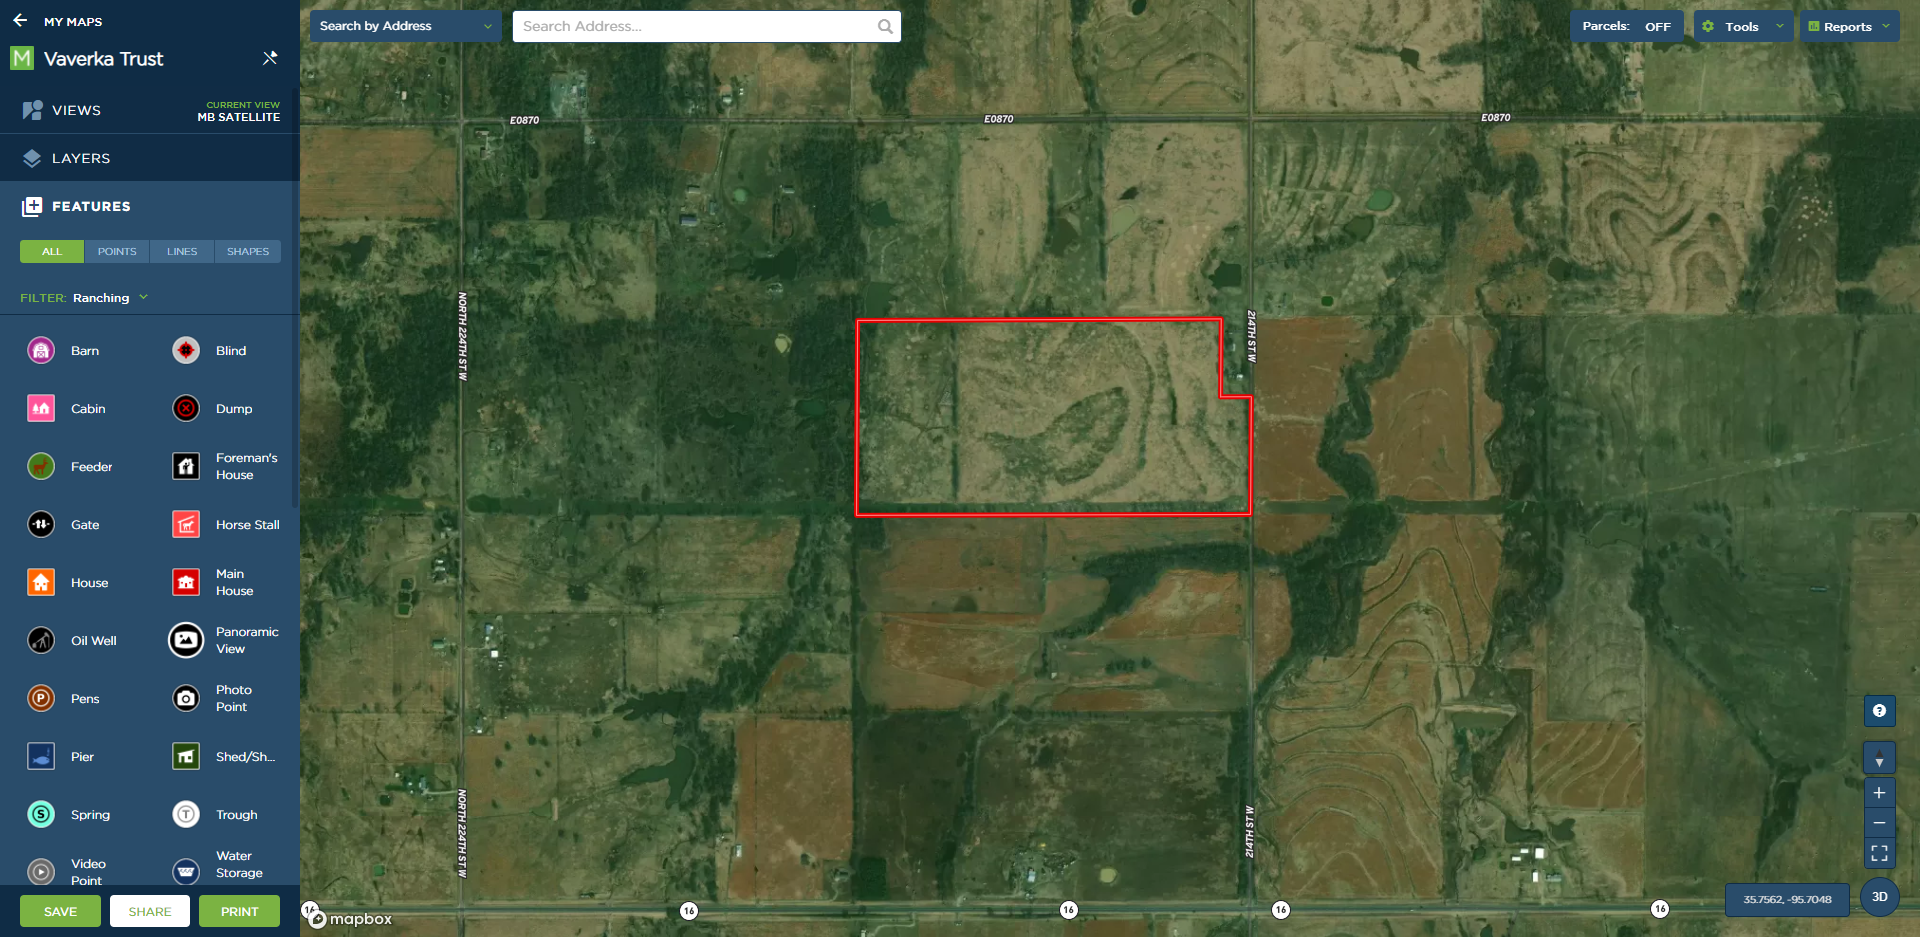 South Haskell 78 AC Parcel Map